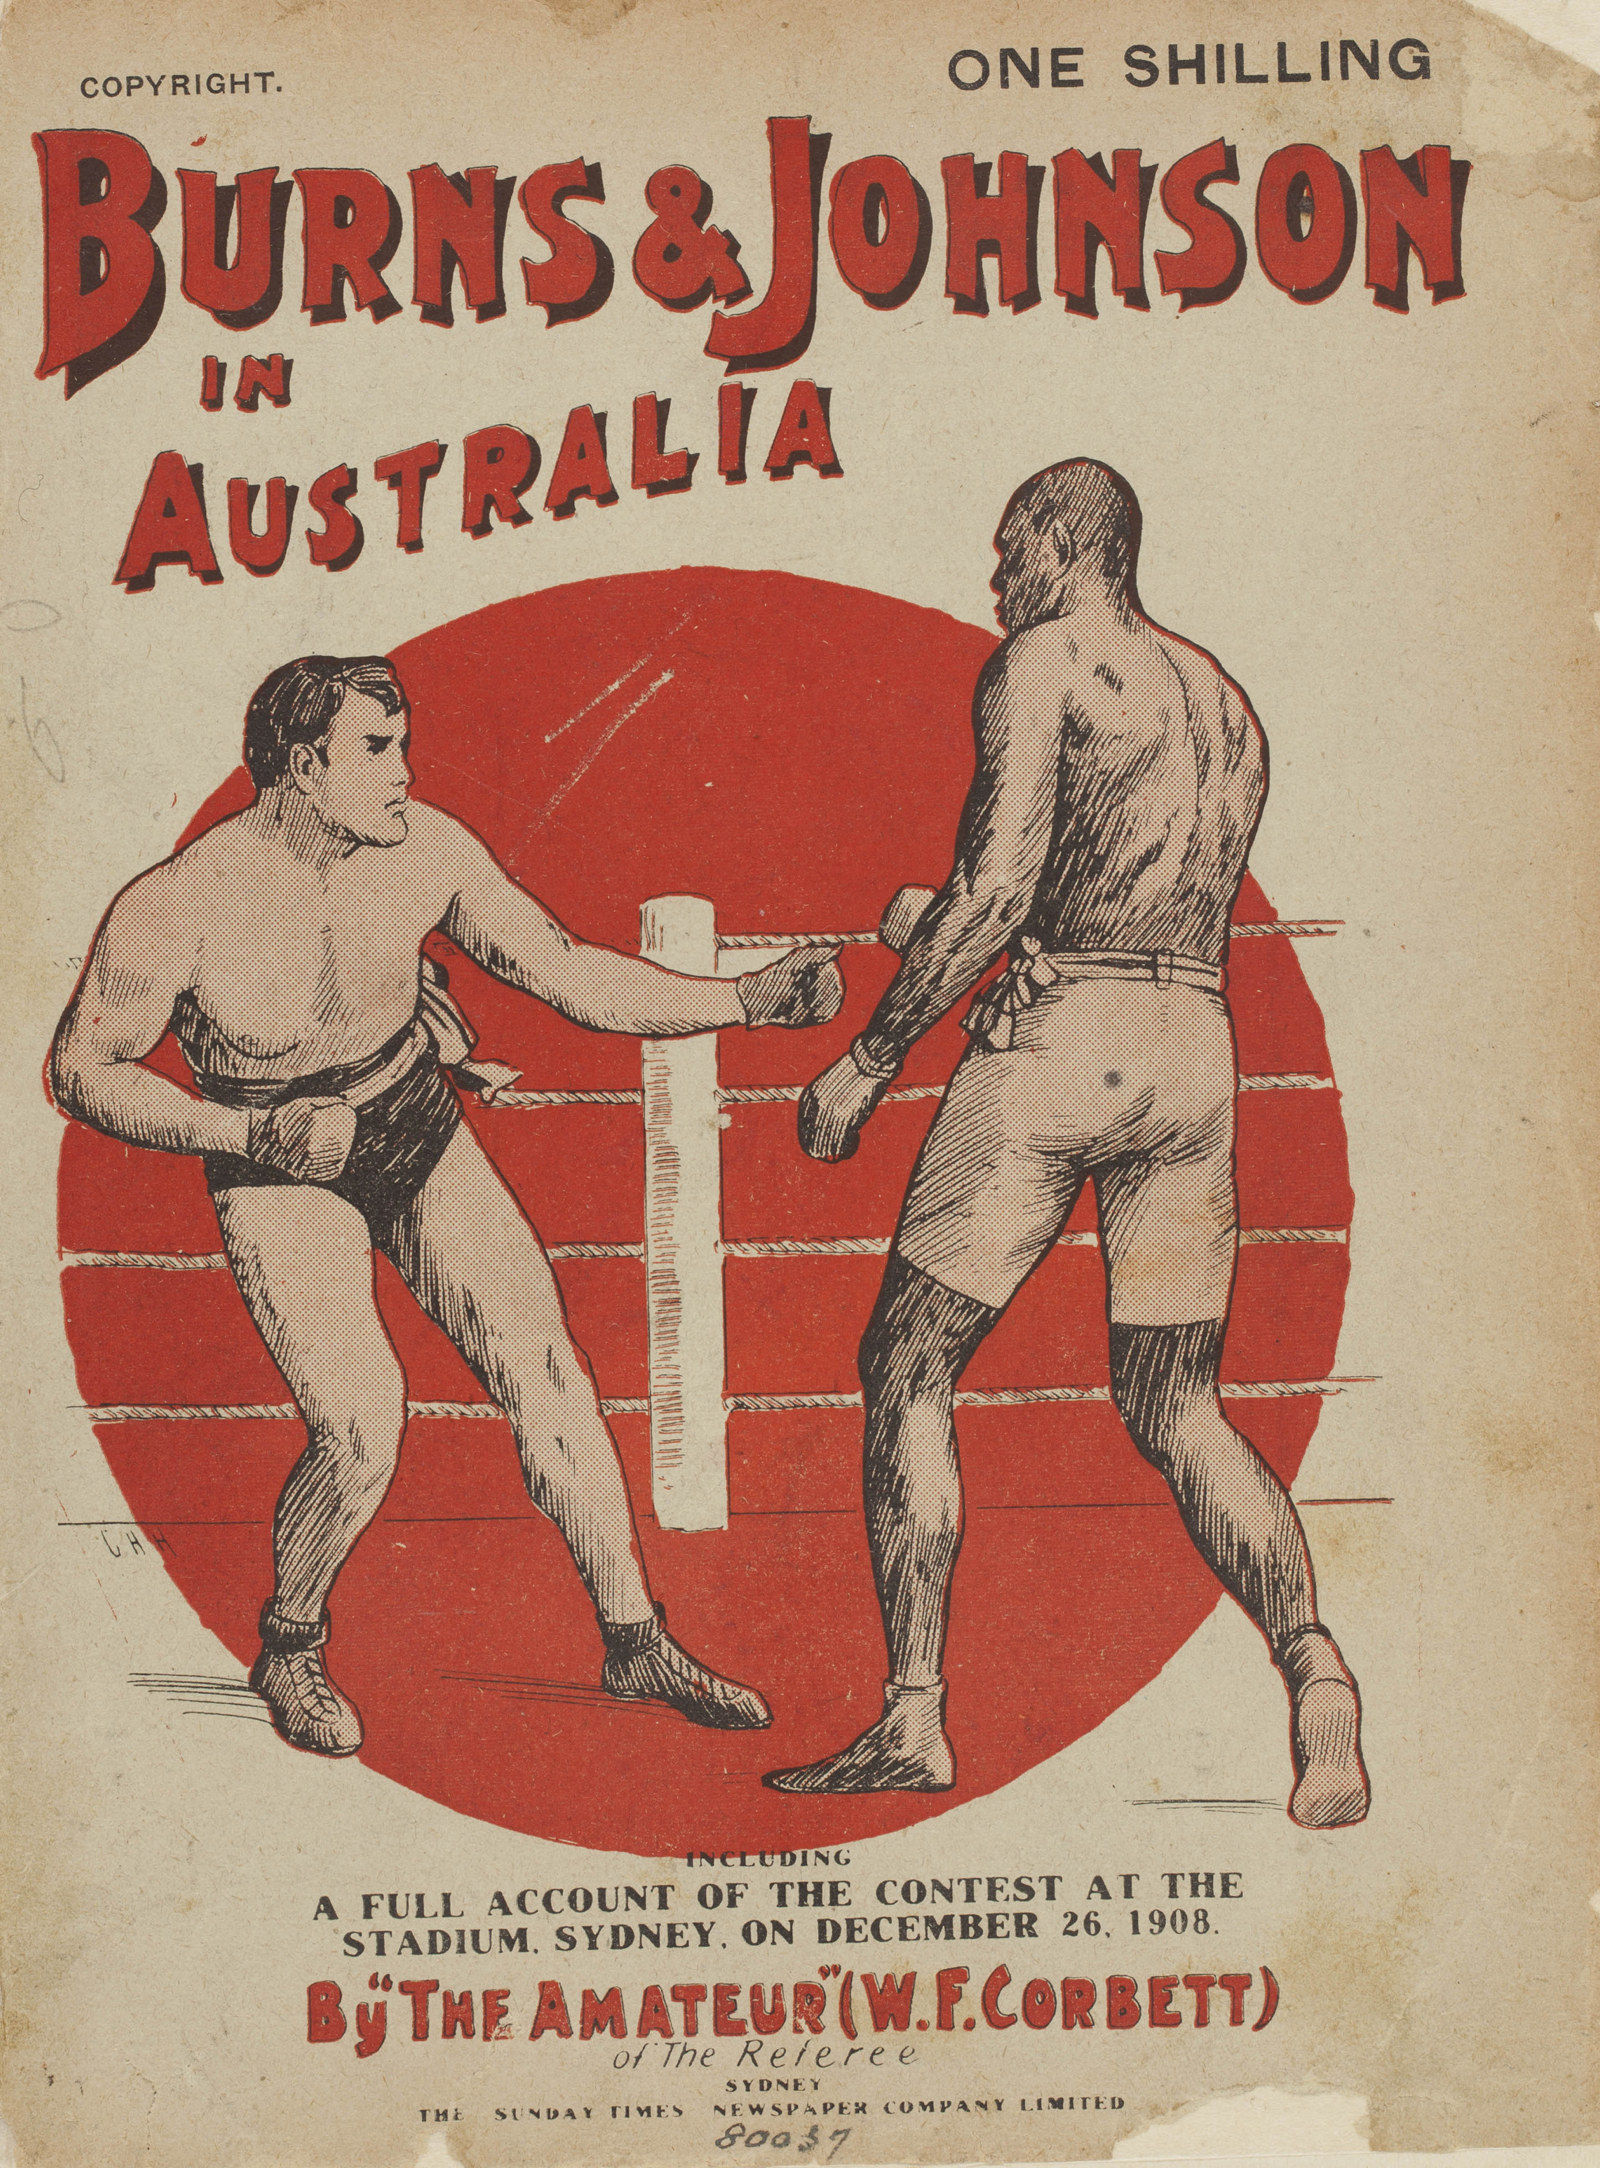 Inside cover of book with title and drawing of Burns and Johnson during their famous boxing match